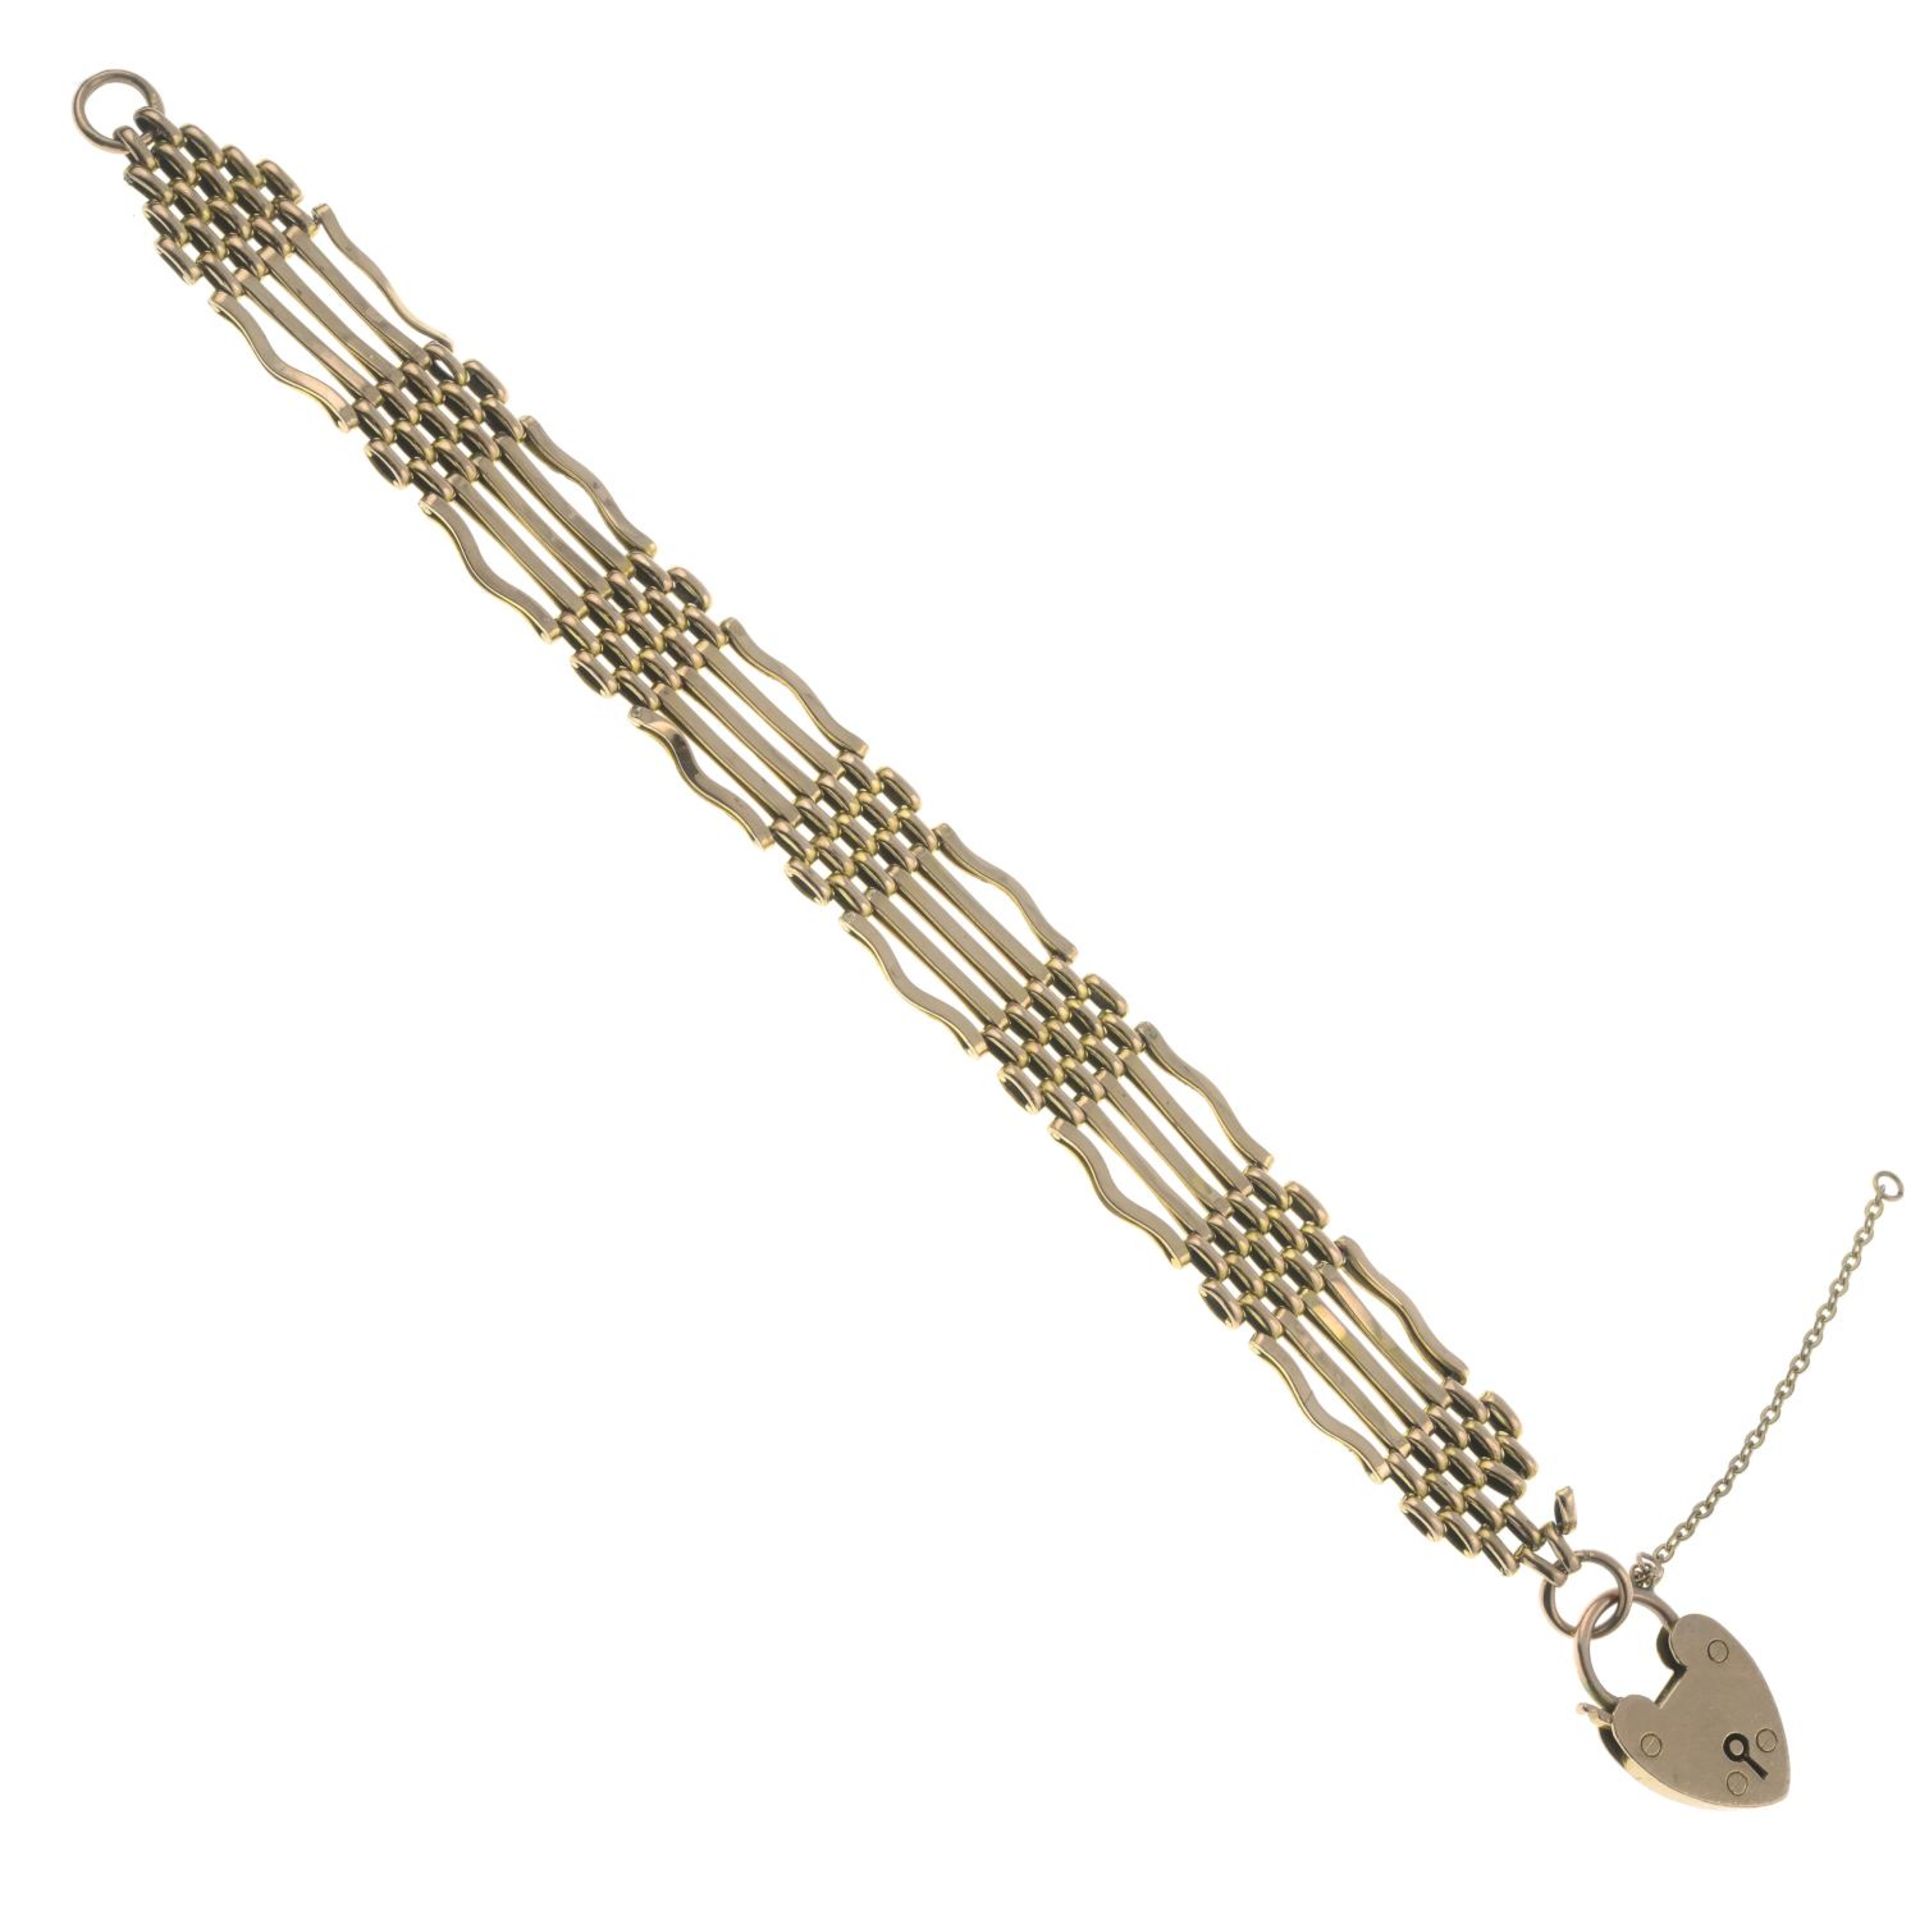 A fancy gate-link bracelet, with brick-link spacers, gathered at a 9ct gold heart padlock clasp. - Image 2 of 2